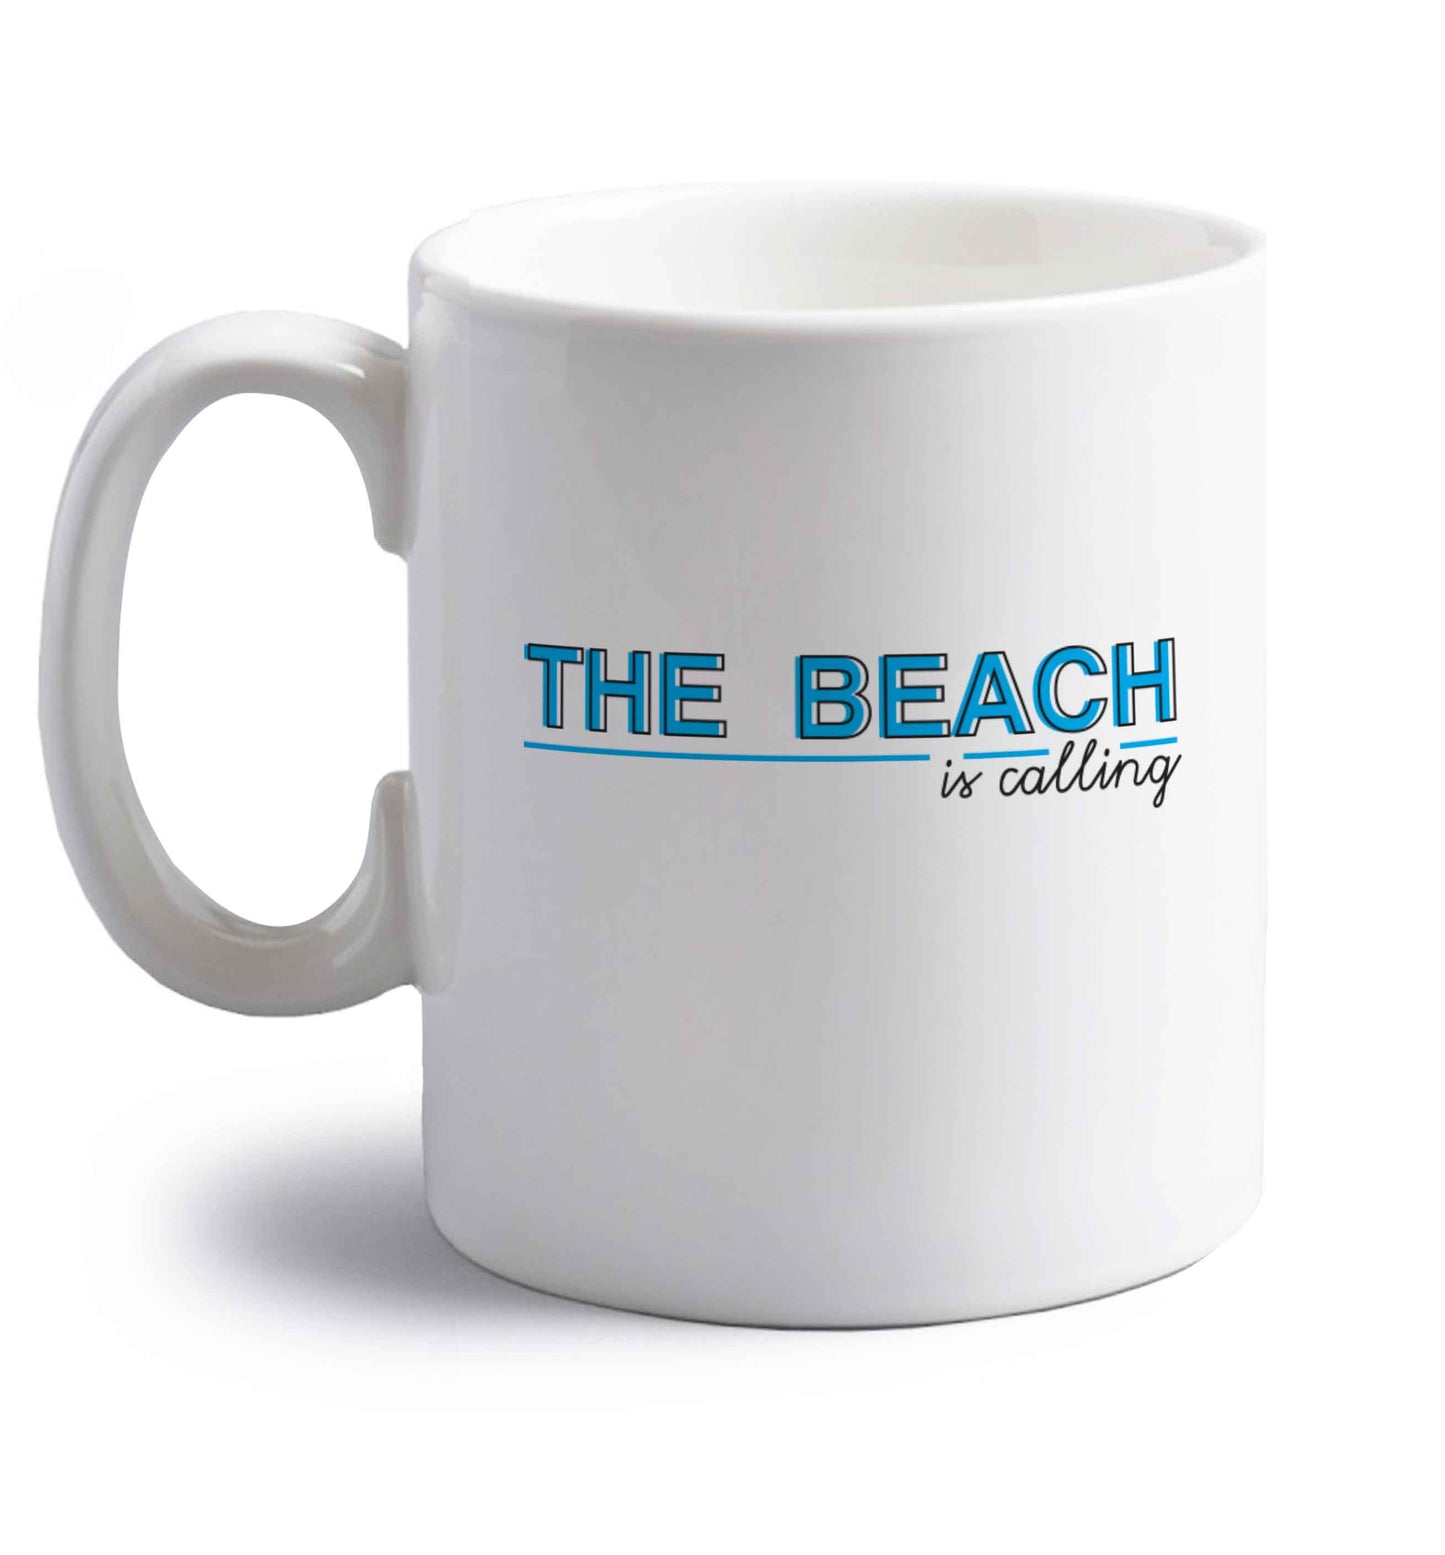 The beach is calling right handed white ceramic mug 